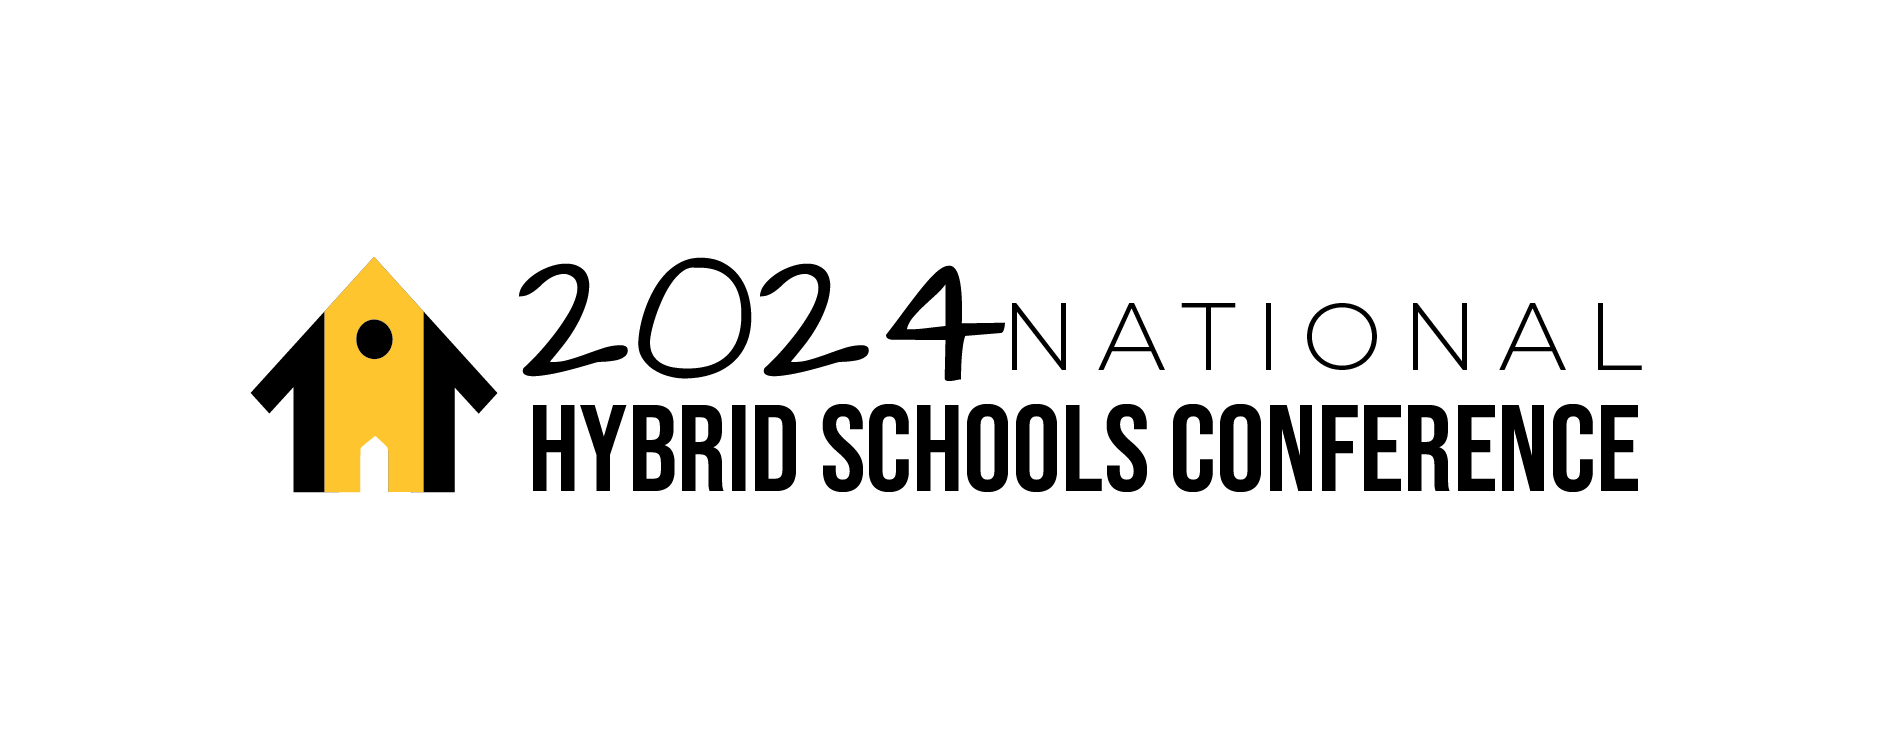 3rd Annual National Hybrid Schools Conference